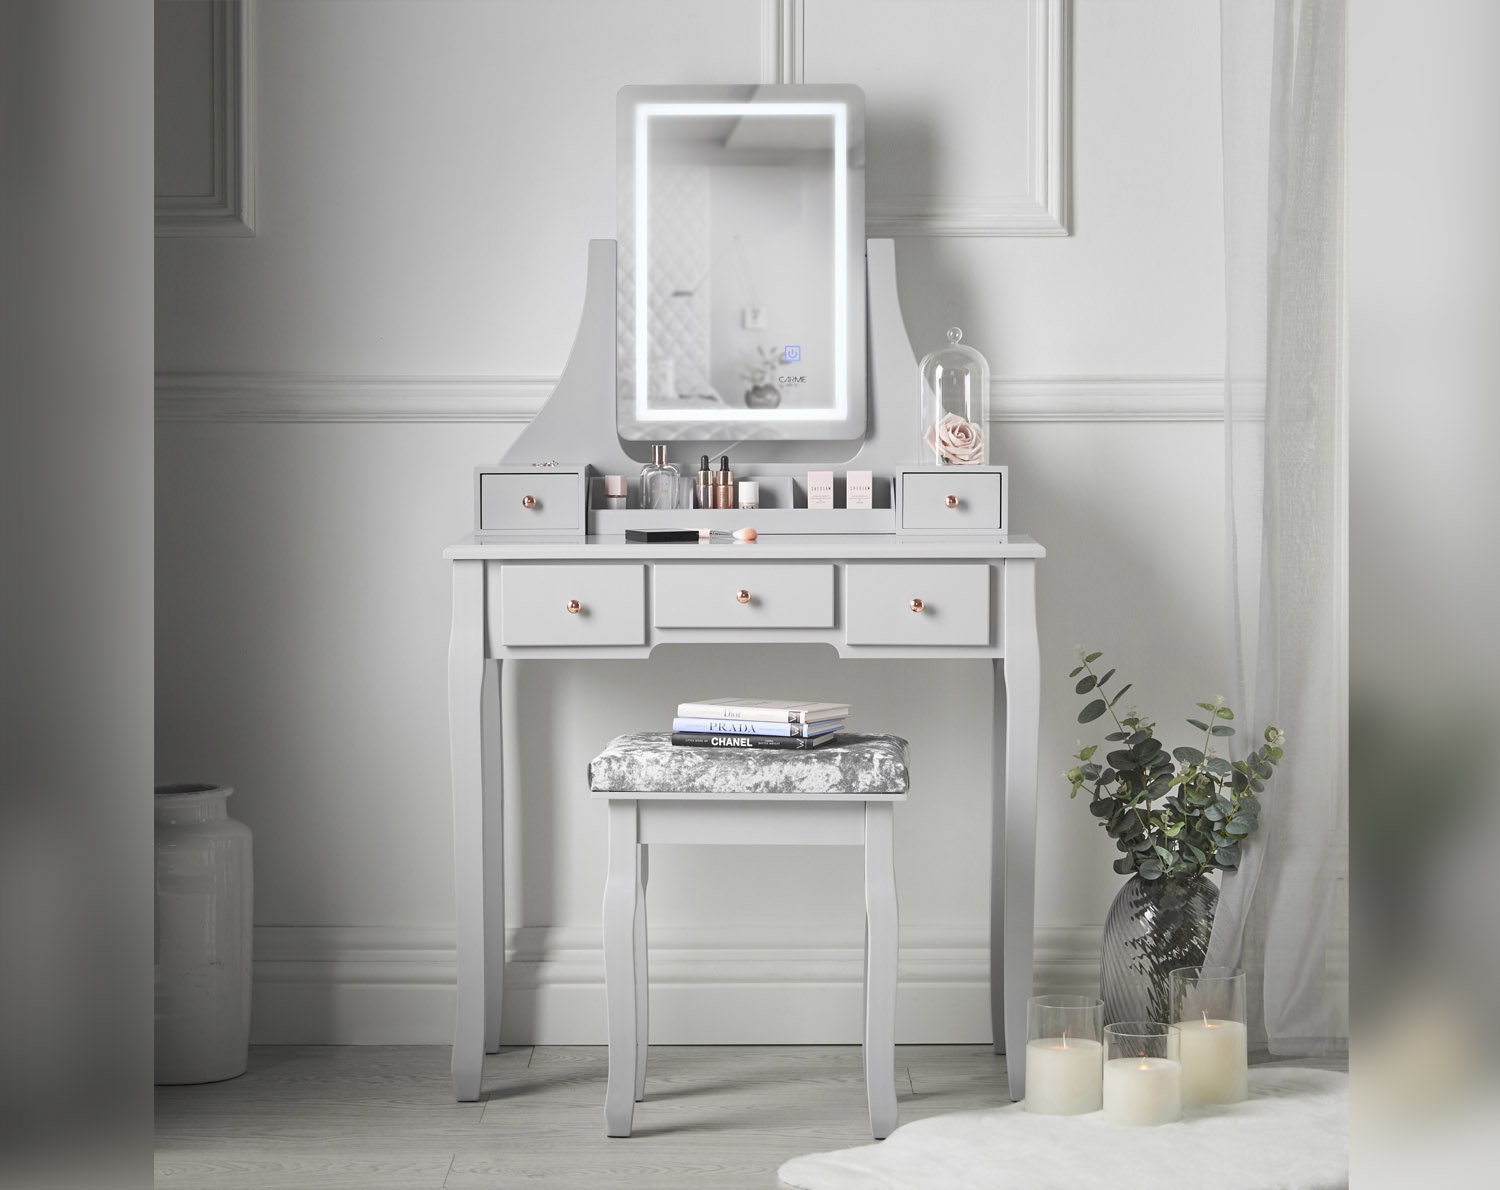 Touch Vanity Mirror Led Lights, Mirrored Dressing Table With Drawers Ireland